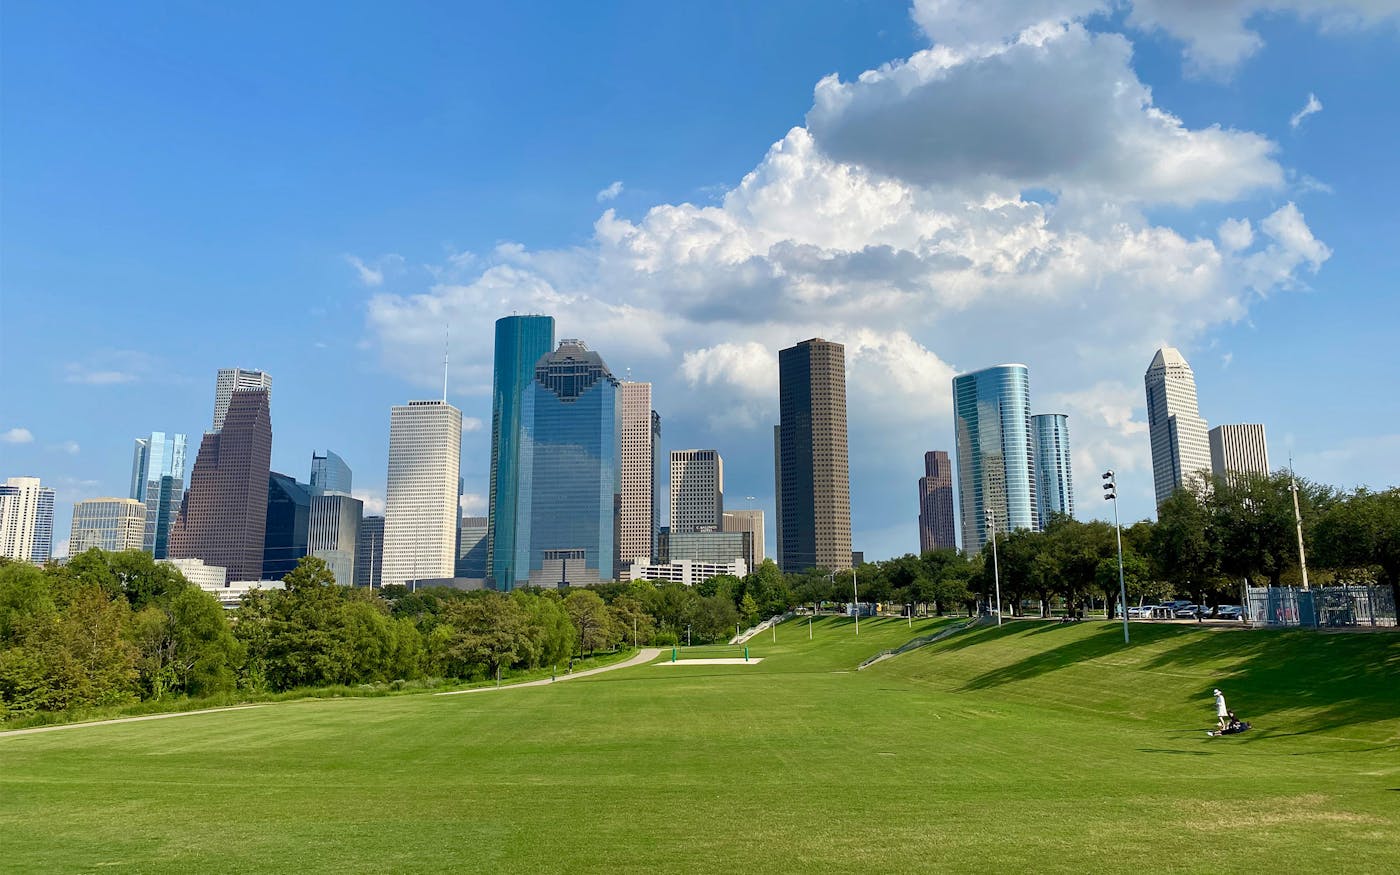 Three Days, Three Parks: How to Spend a Green Weekend in Downtown Houston